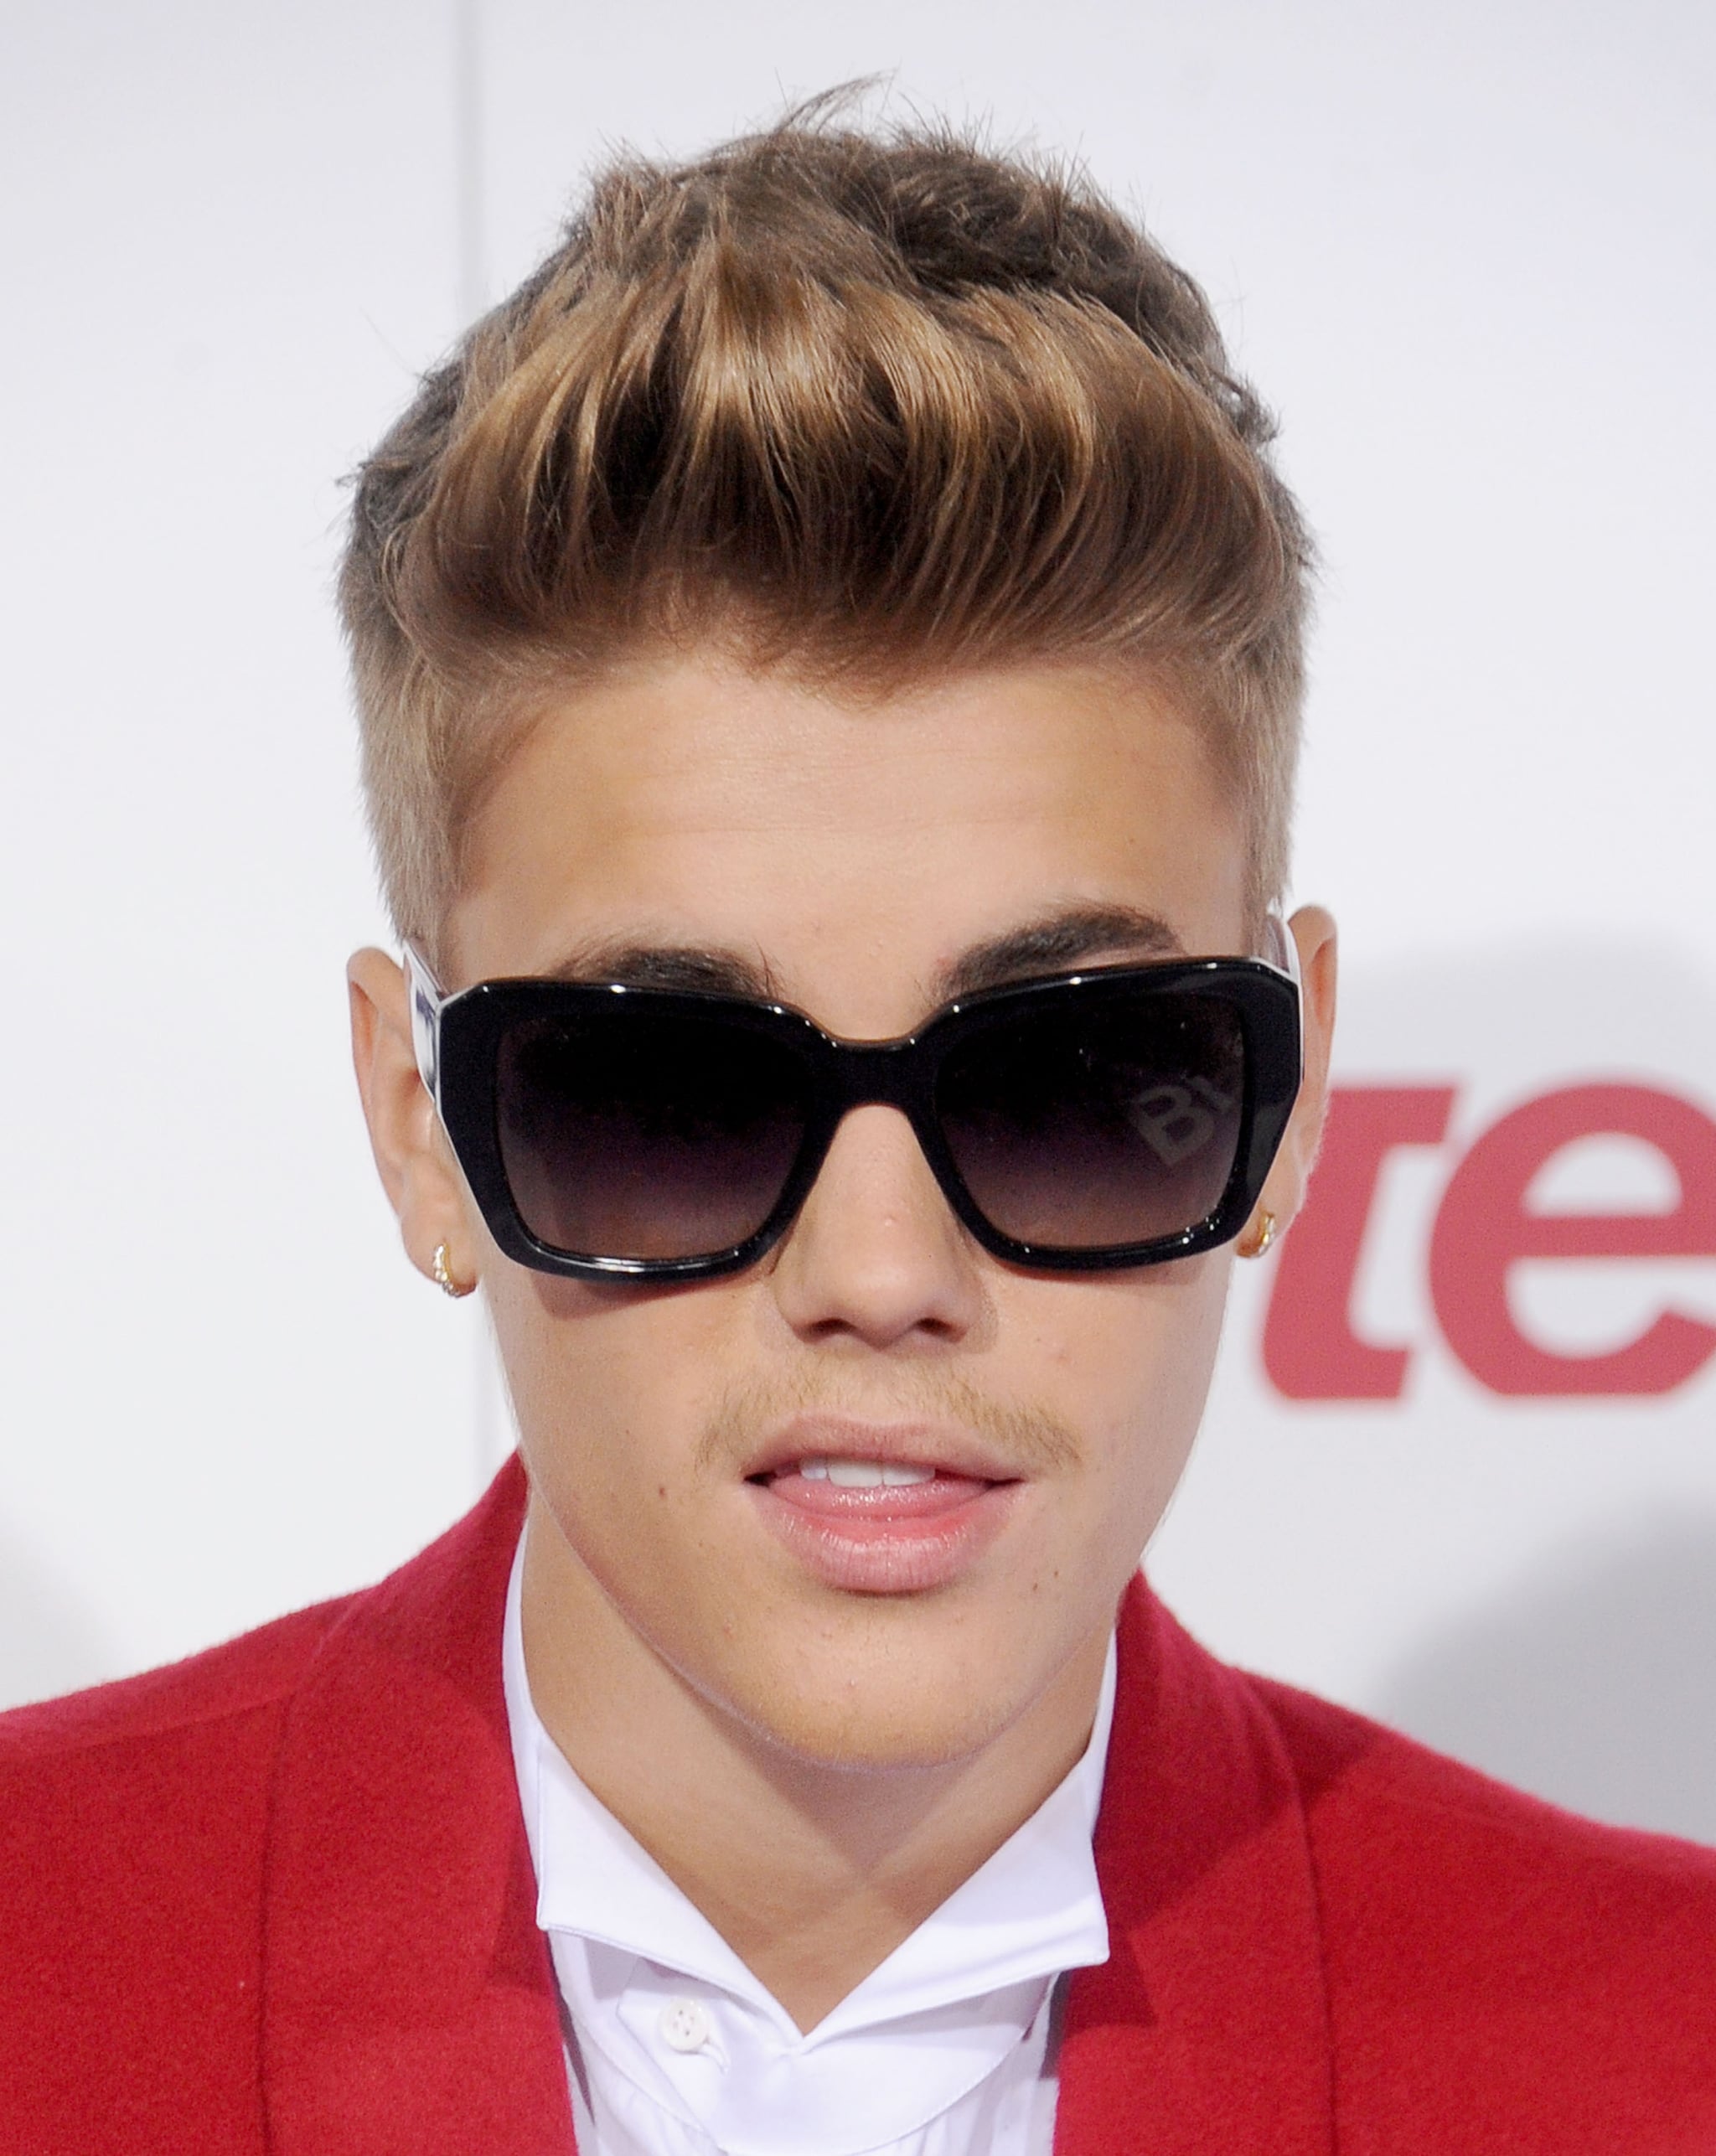 3 Ways to Get the Justin Bieber Haircut  wikiHow